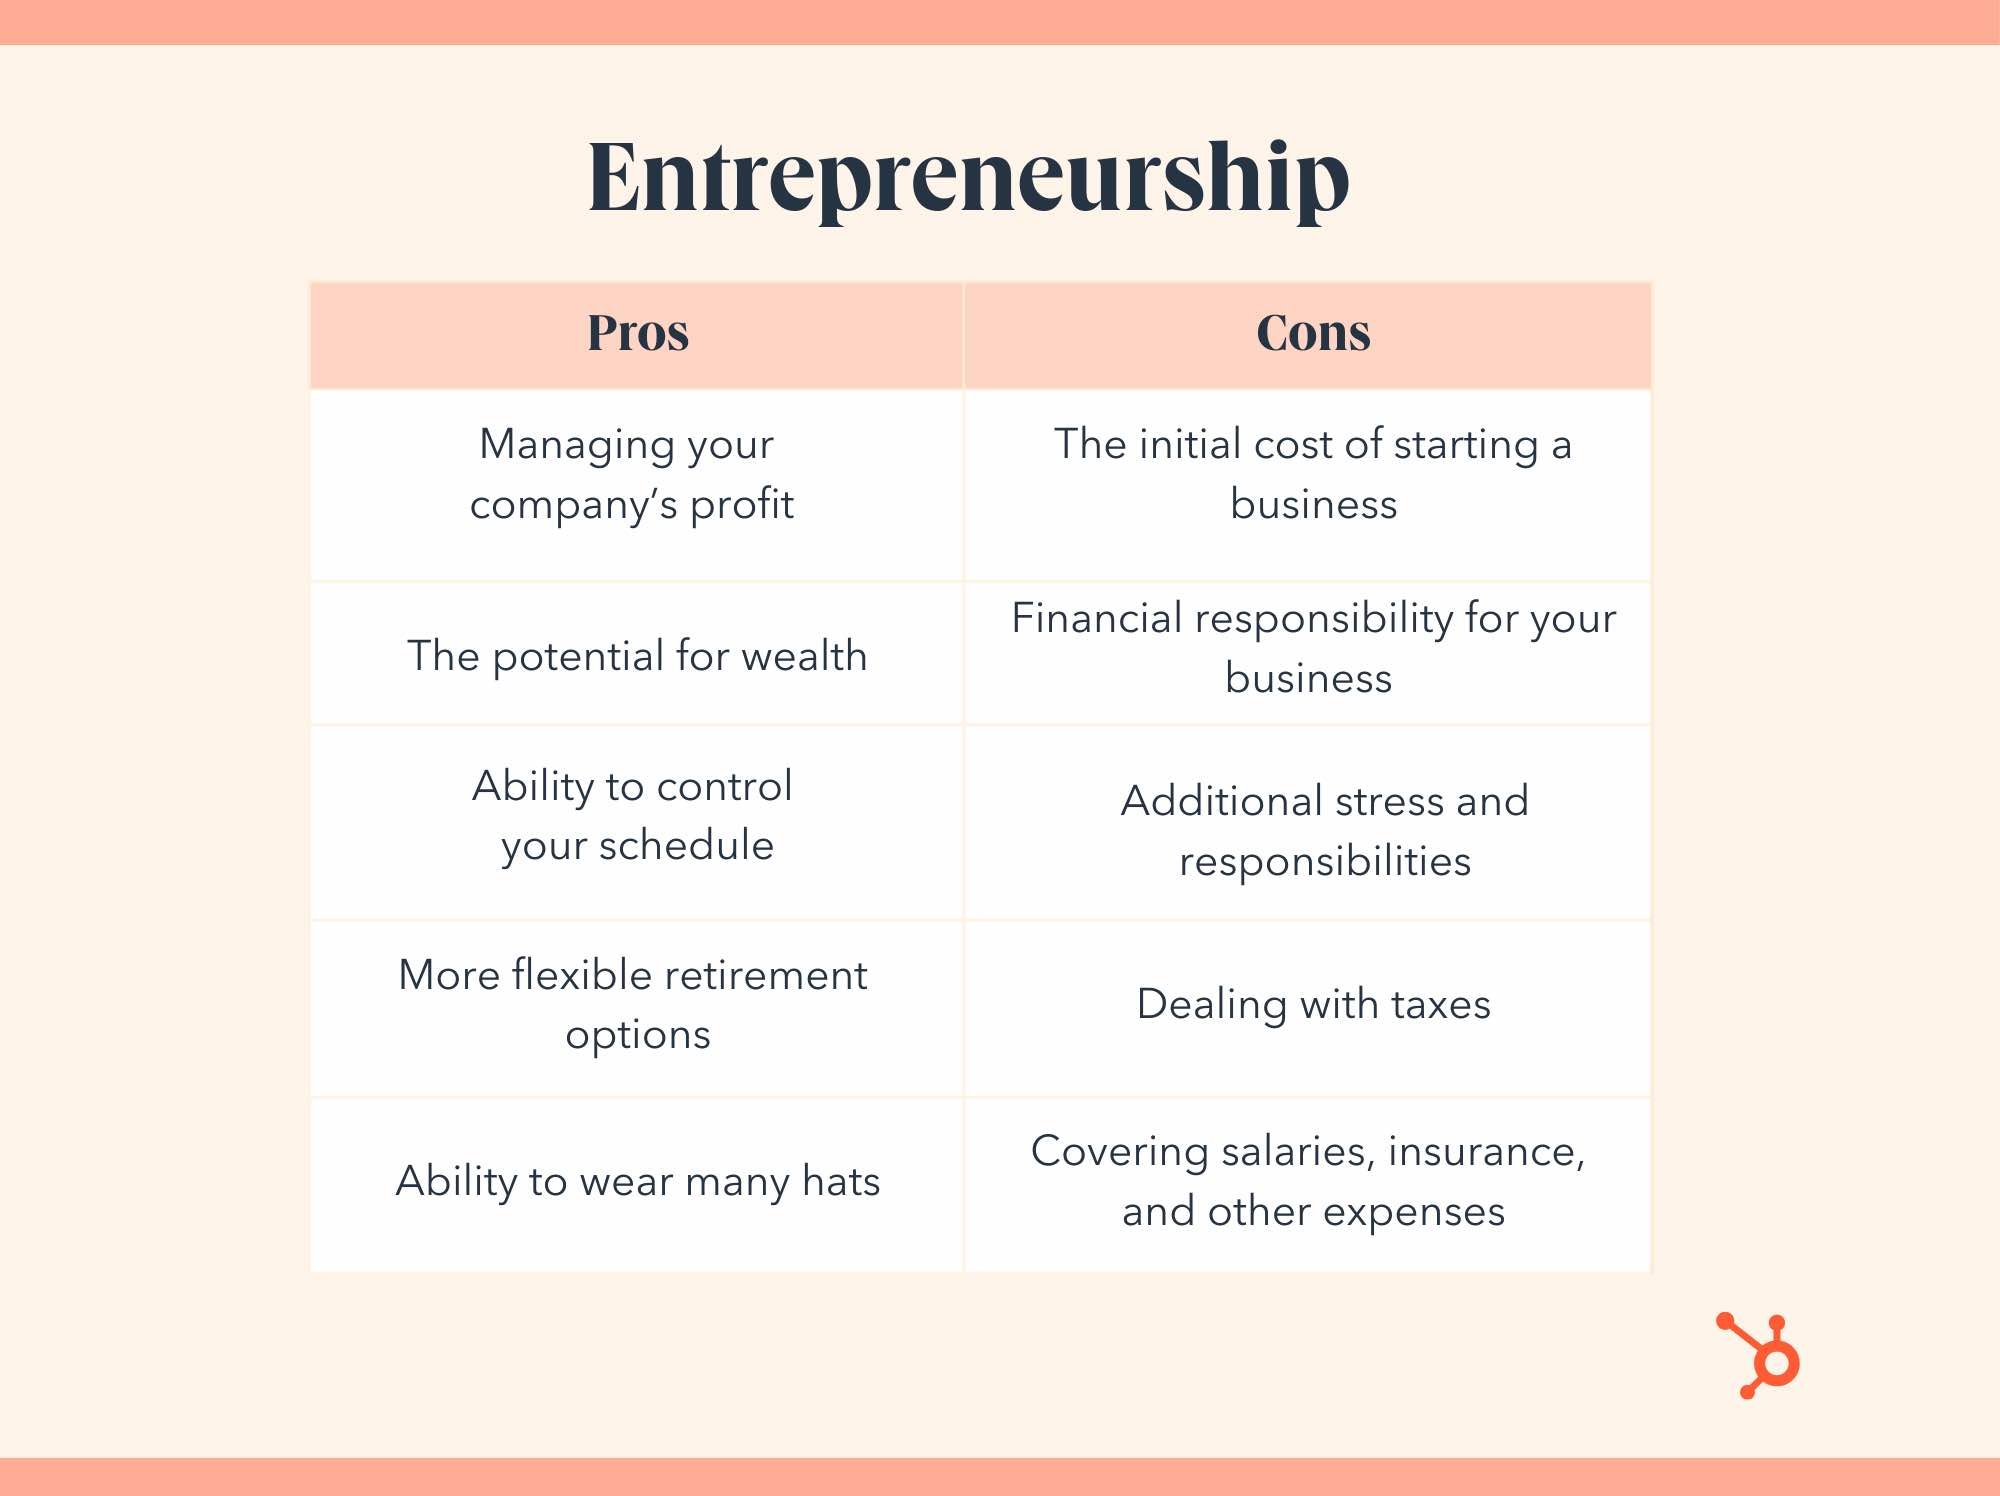 entrepreneurship vs employment. Entrepreneurship pro: managing your company profit, potential for wealth, ability to control your schedule, flexible retirement. Entrepreneurship con: initial costs, financial responsibility, additional stress, taxes, covering salaries and insurance.